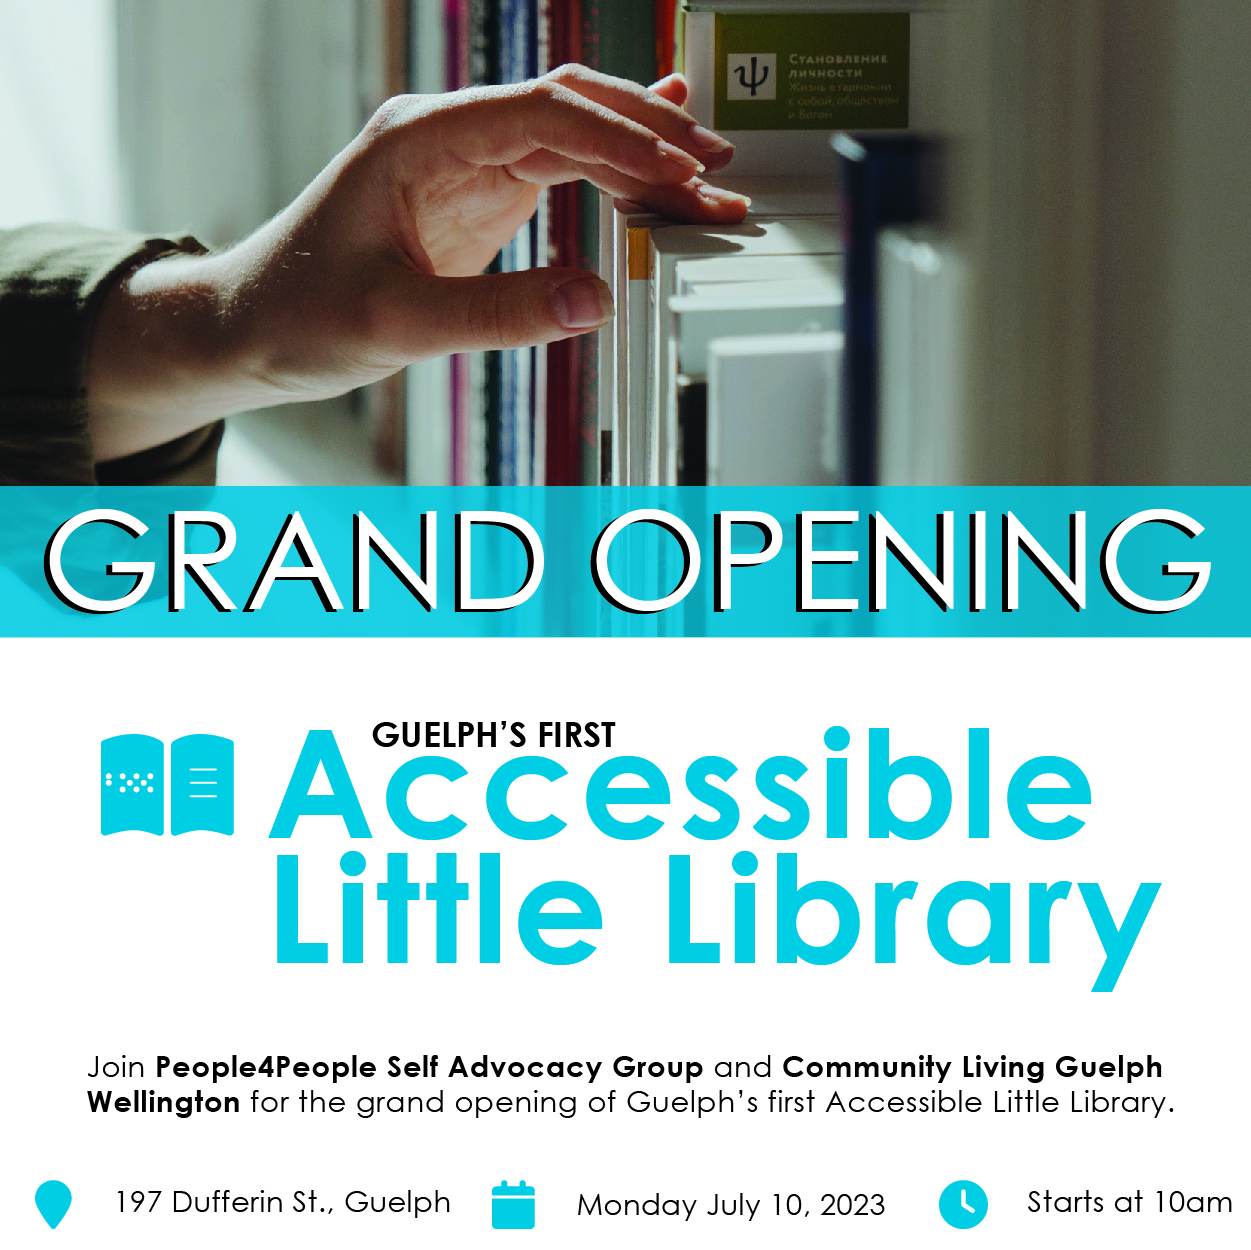 Accessible little library, guelph ontario, ALL, grand opening, community living guelph wellington, community development, community